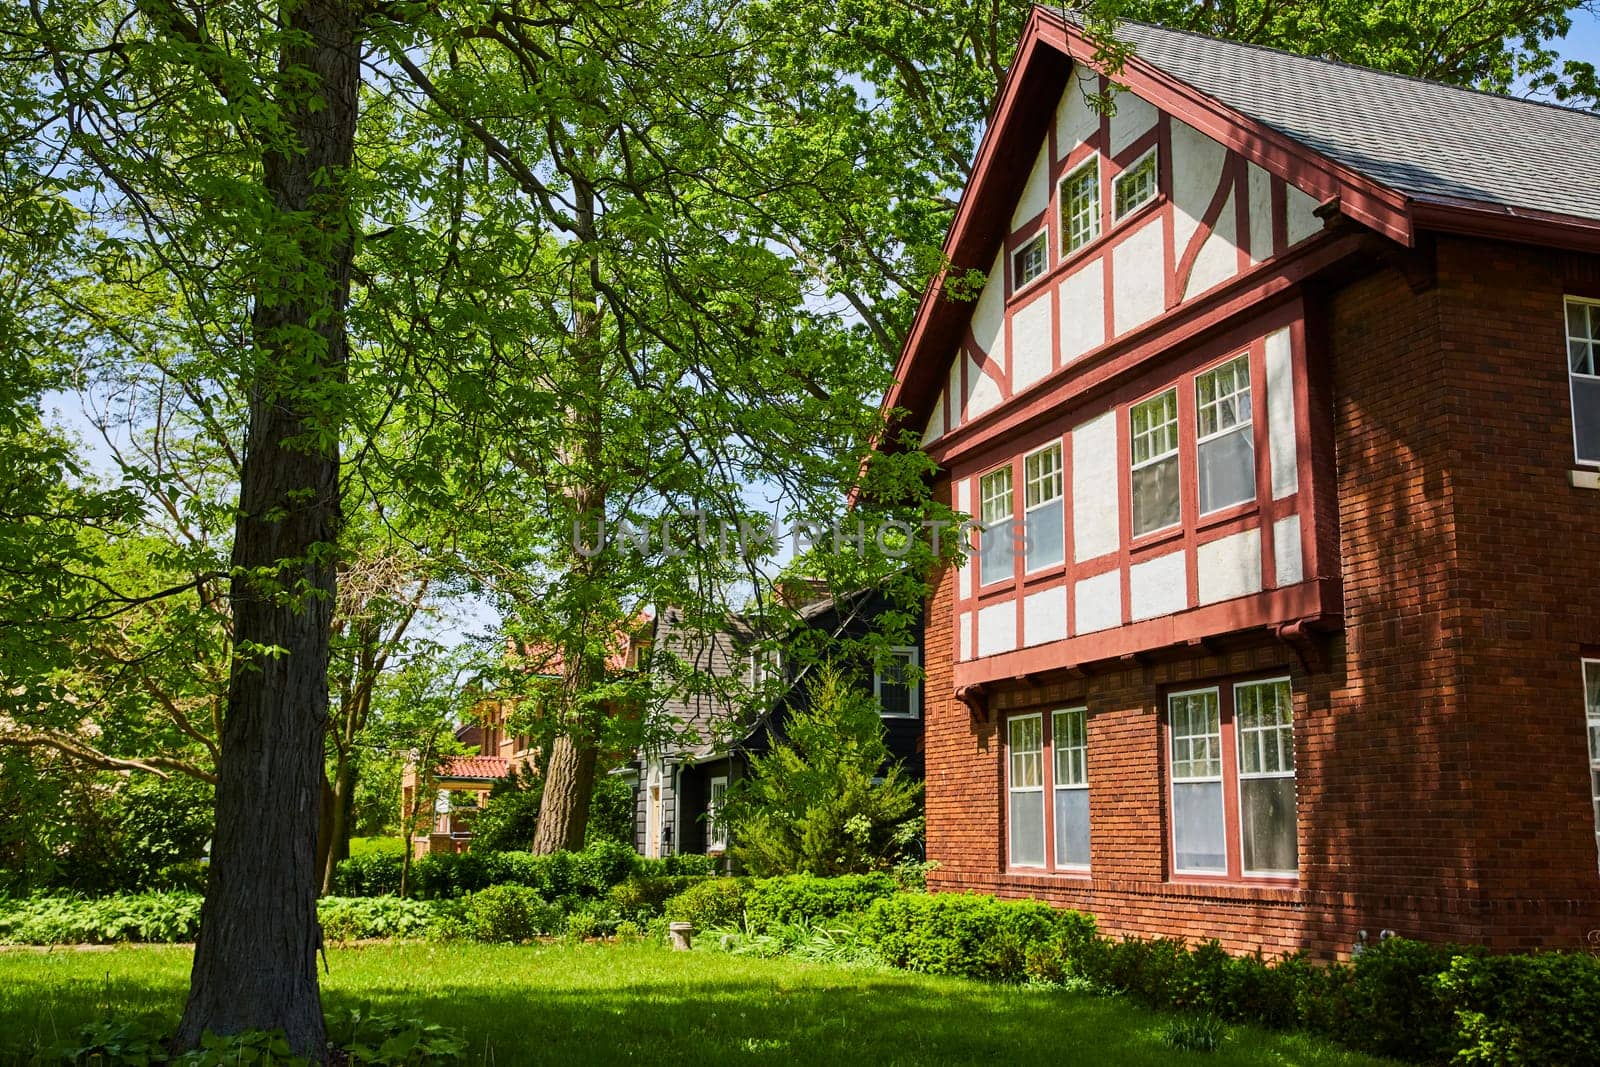 Charming Tudor-style home in South Wayne Historic District, Fort Wayne, enveloped by lush greenery.